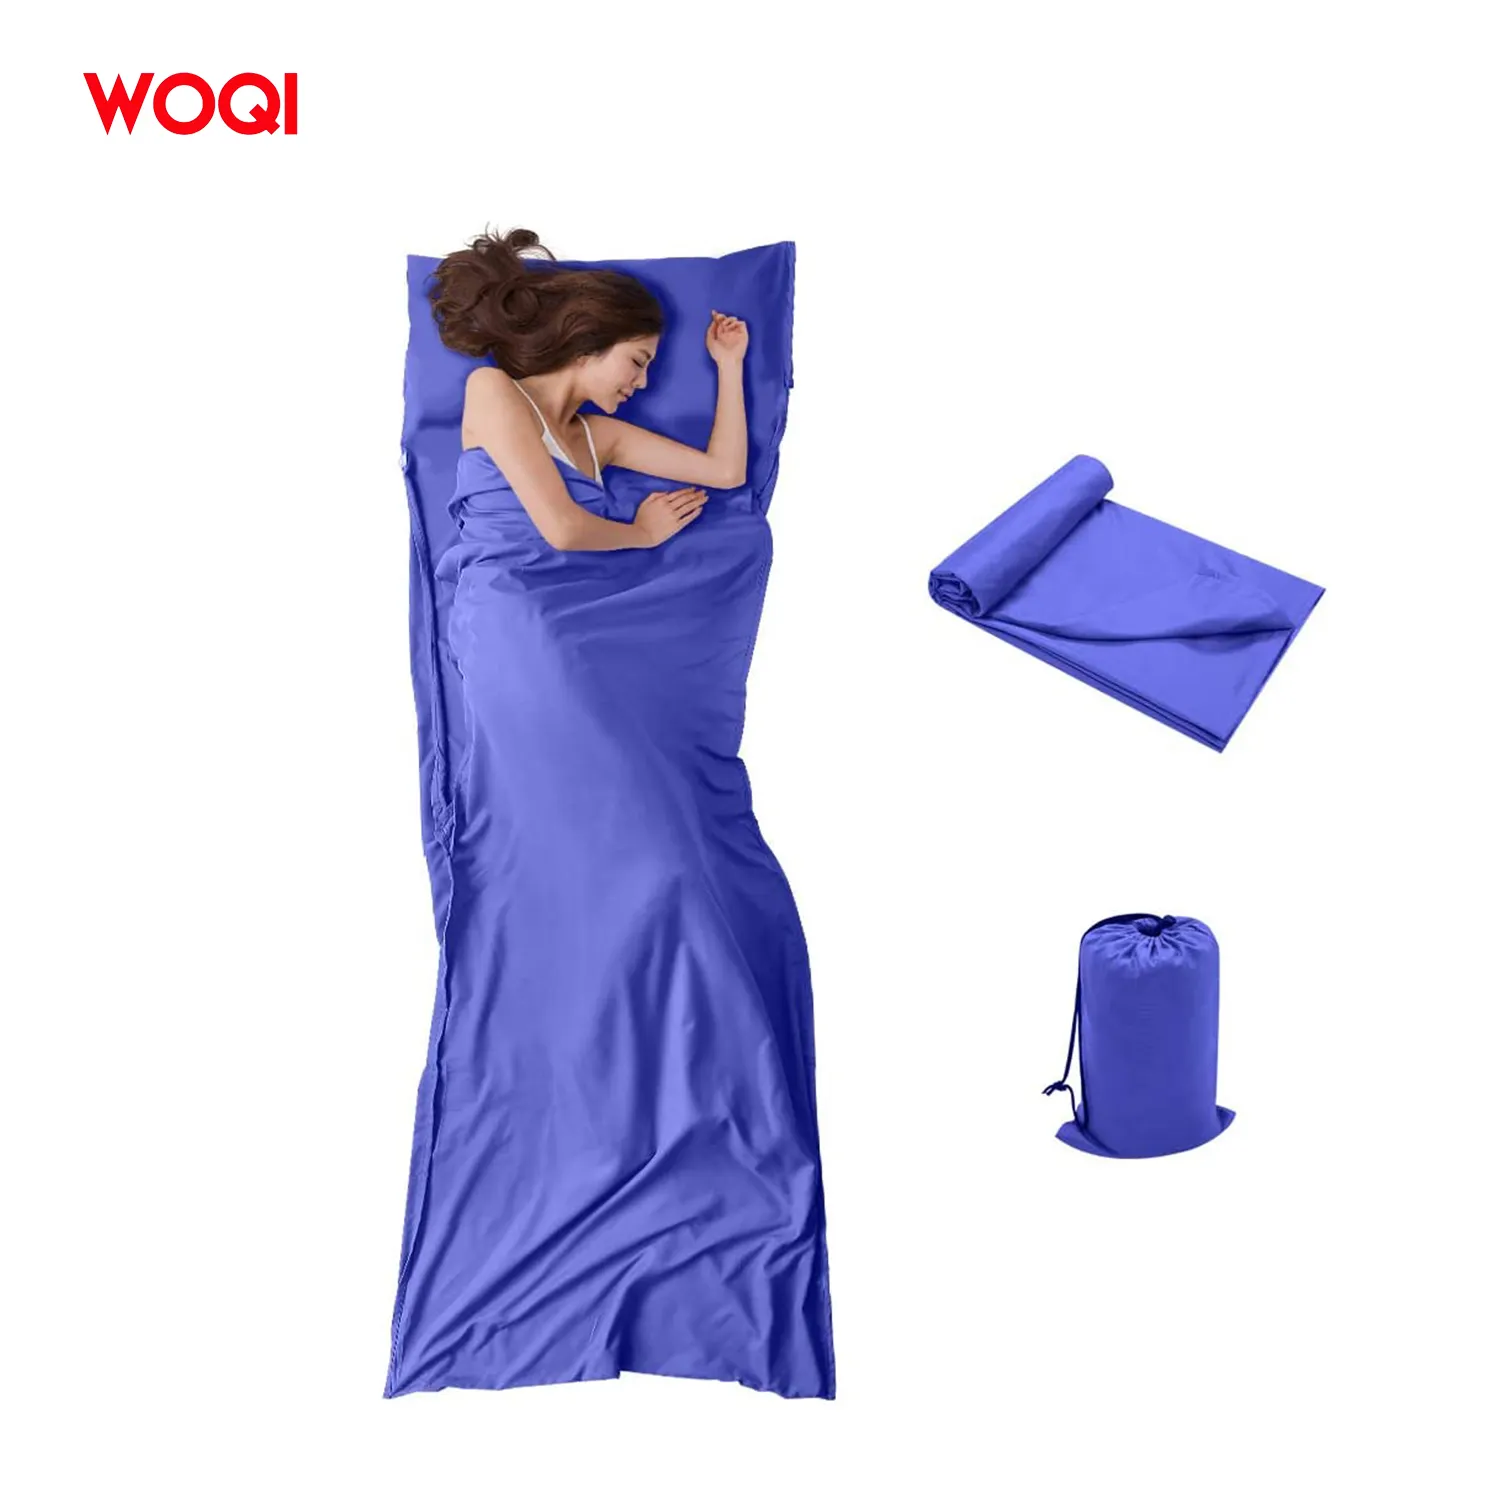 WOQI Custom lightweight cheaper price trains every dirty sleeping bag for camping travel hotel Youth Hostel picnic business trip